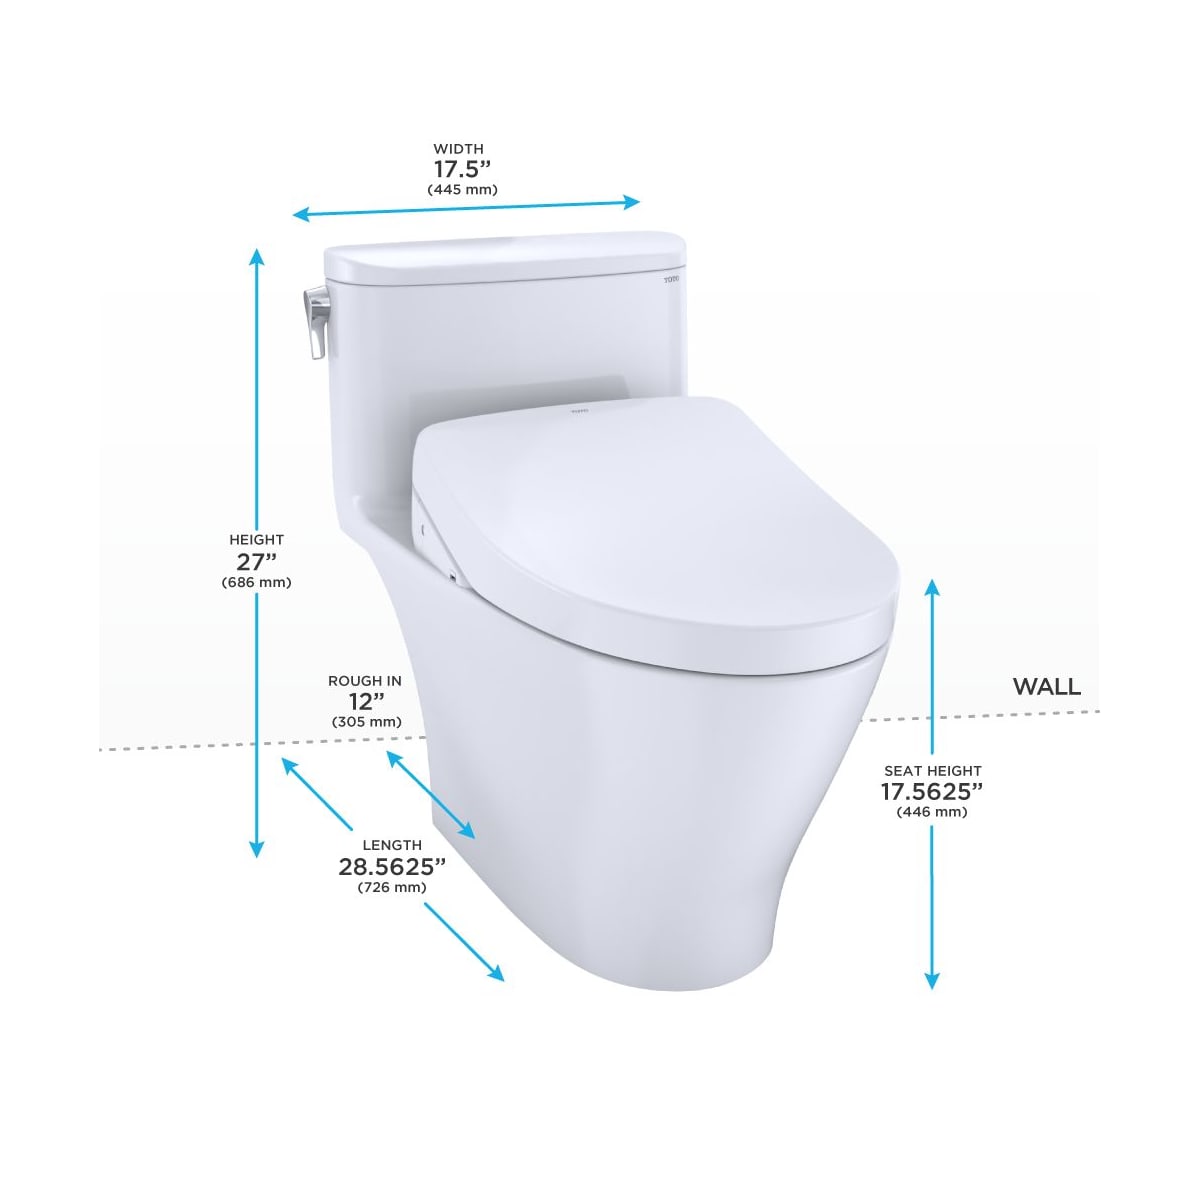 Toto Sw3054at40 01 S550e Washlet And Auto Flush Ready Electronic Bidet Toilet Seat With Ewater And Auto Open And Close Classic Lid Elongated Cotton White In 2020 Washlet Toilet Installation Custom Shower Doors